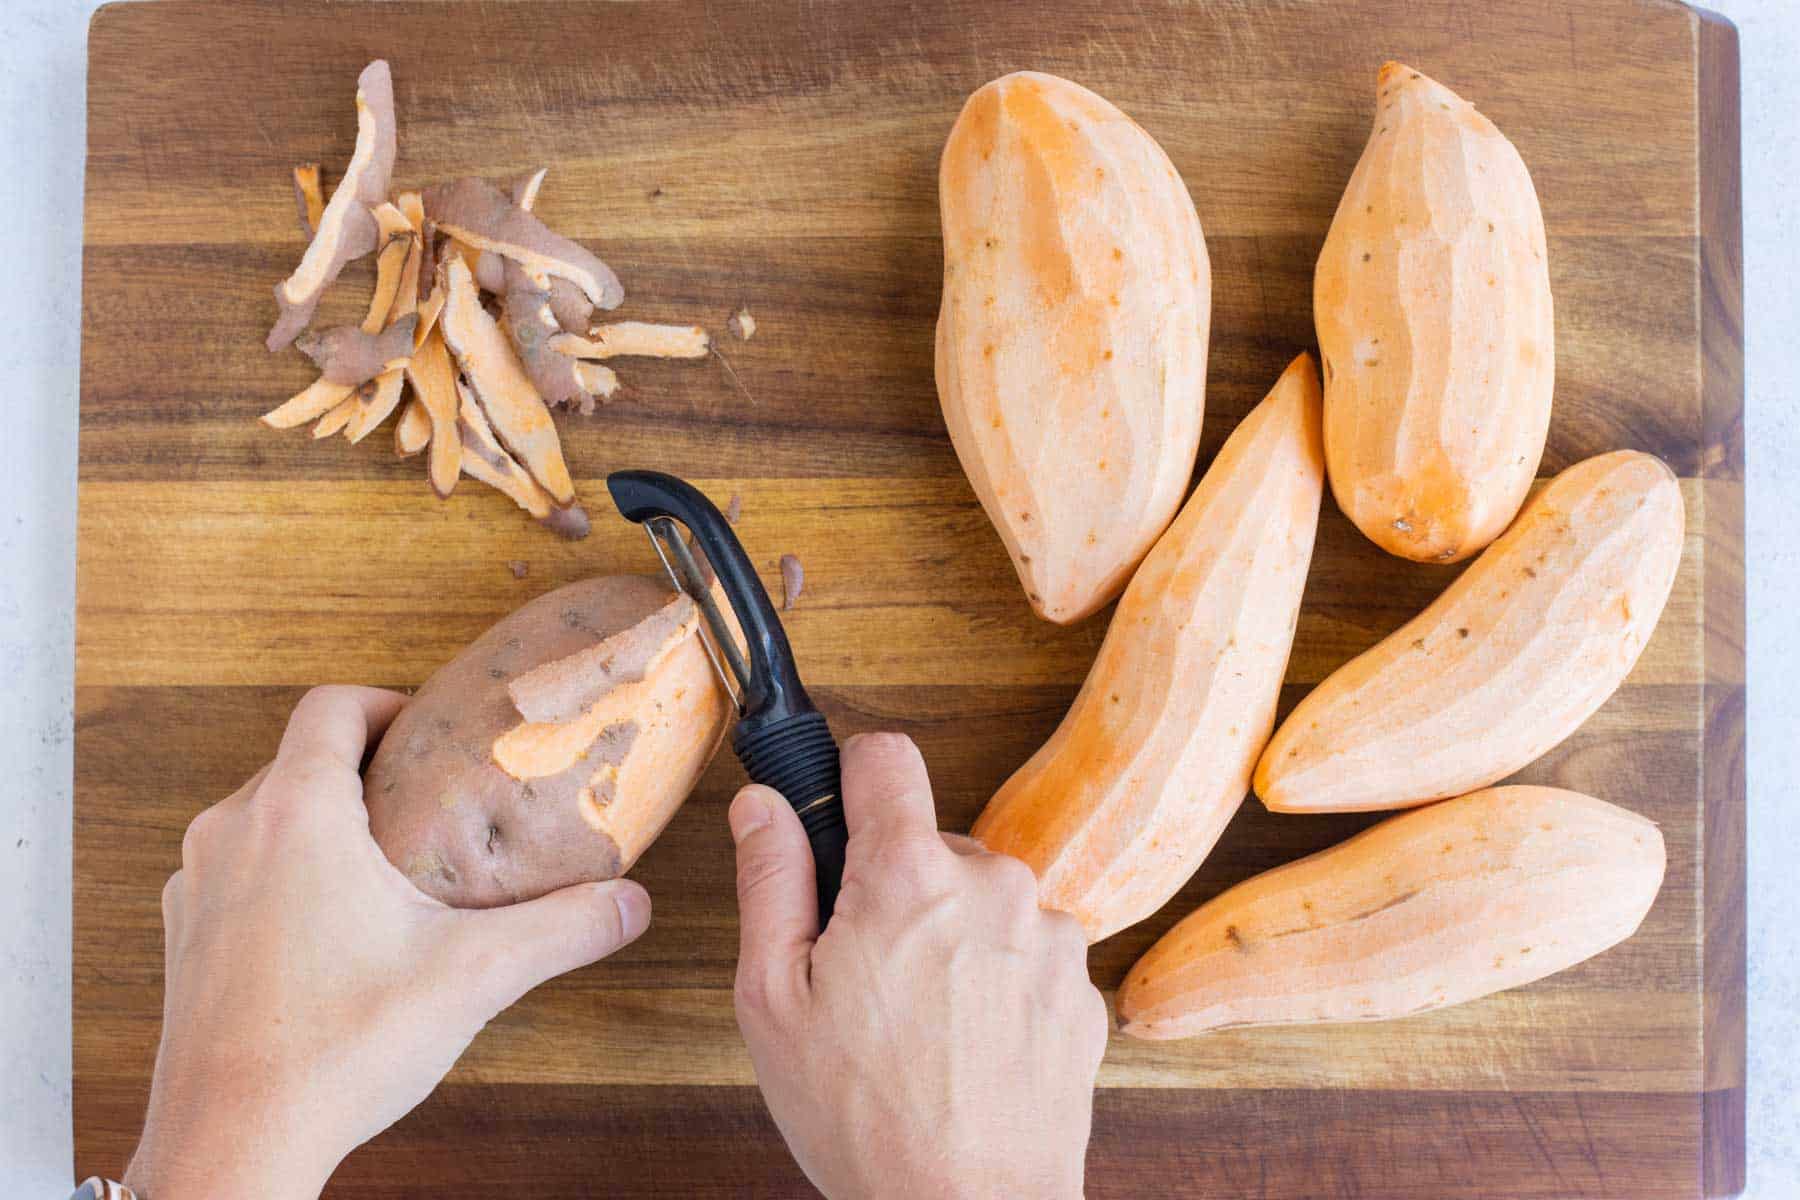 A vegetable peeler removes the skin from sweet potatoes.